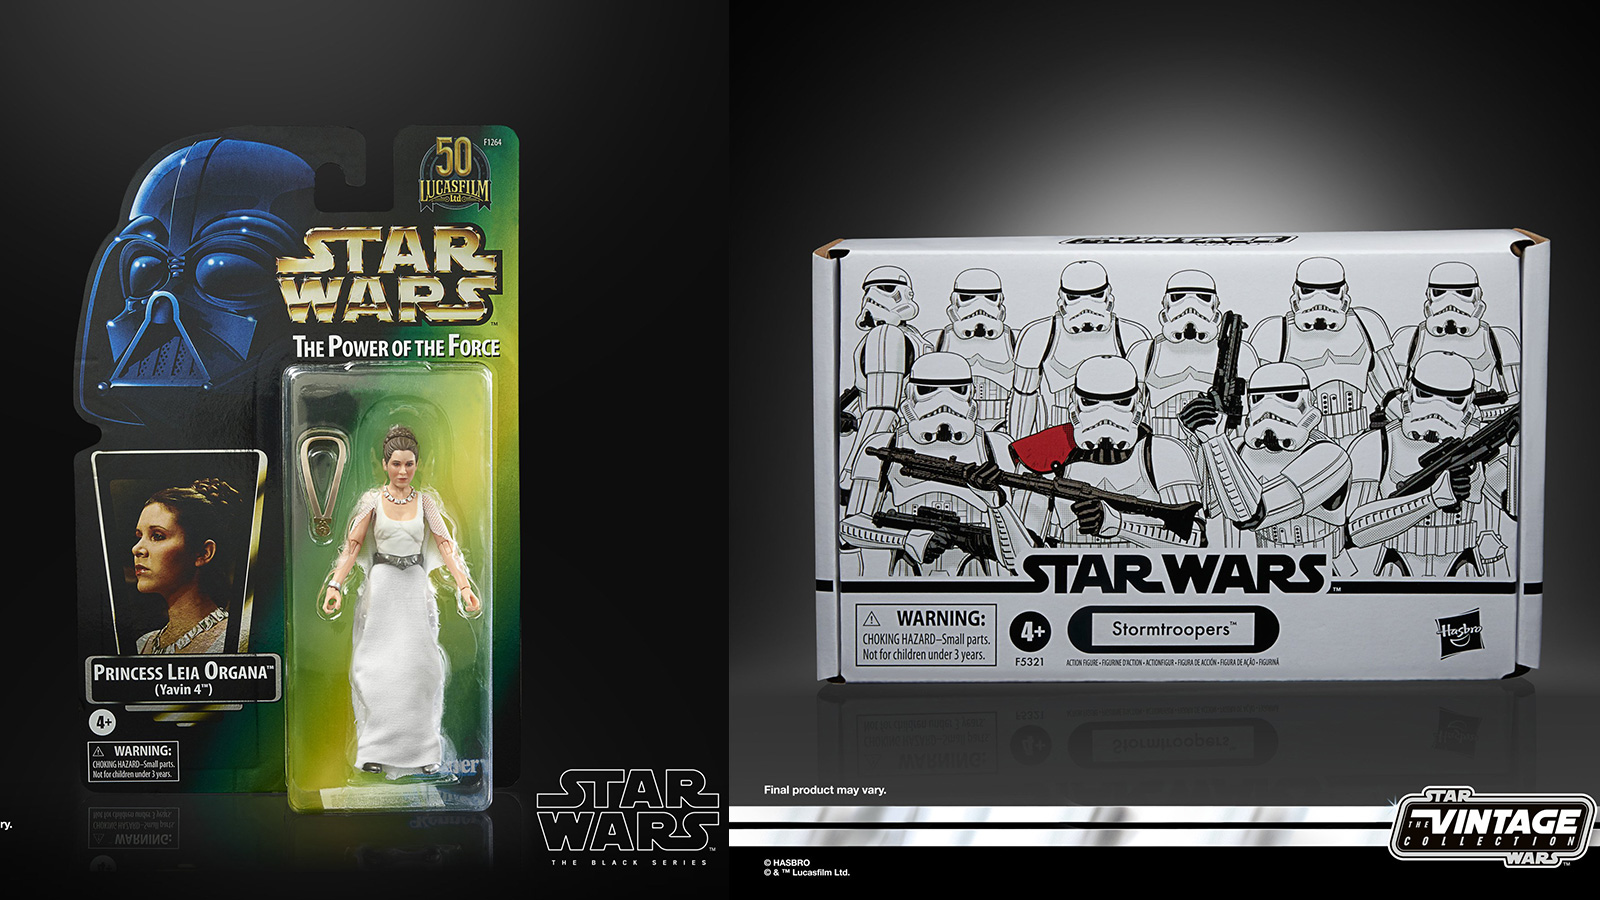 Shipping Soon From Hasbro Pulse - Exclusive TBS 6-Inch The Power Of The Force Princess Leia Organa (Yavin) And TVC 3.75-Inch Stormtrooper 4-Pack